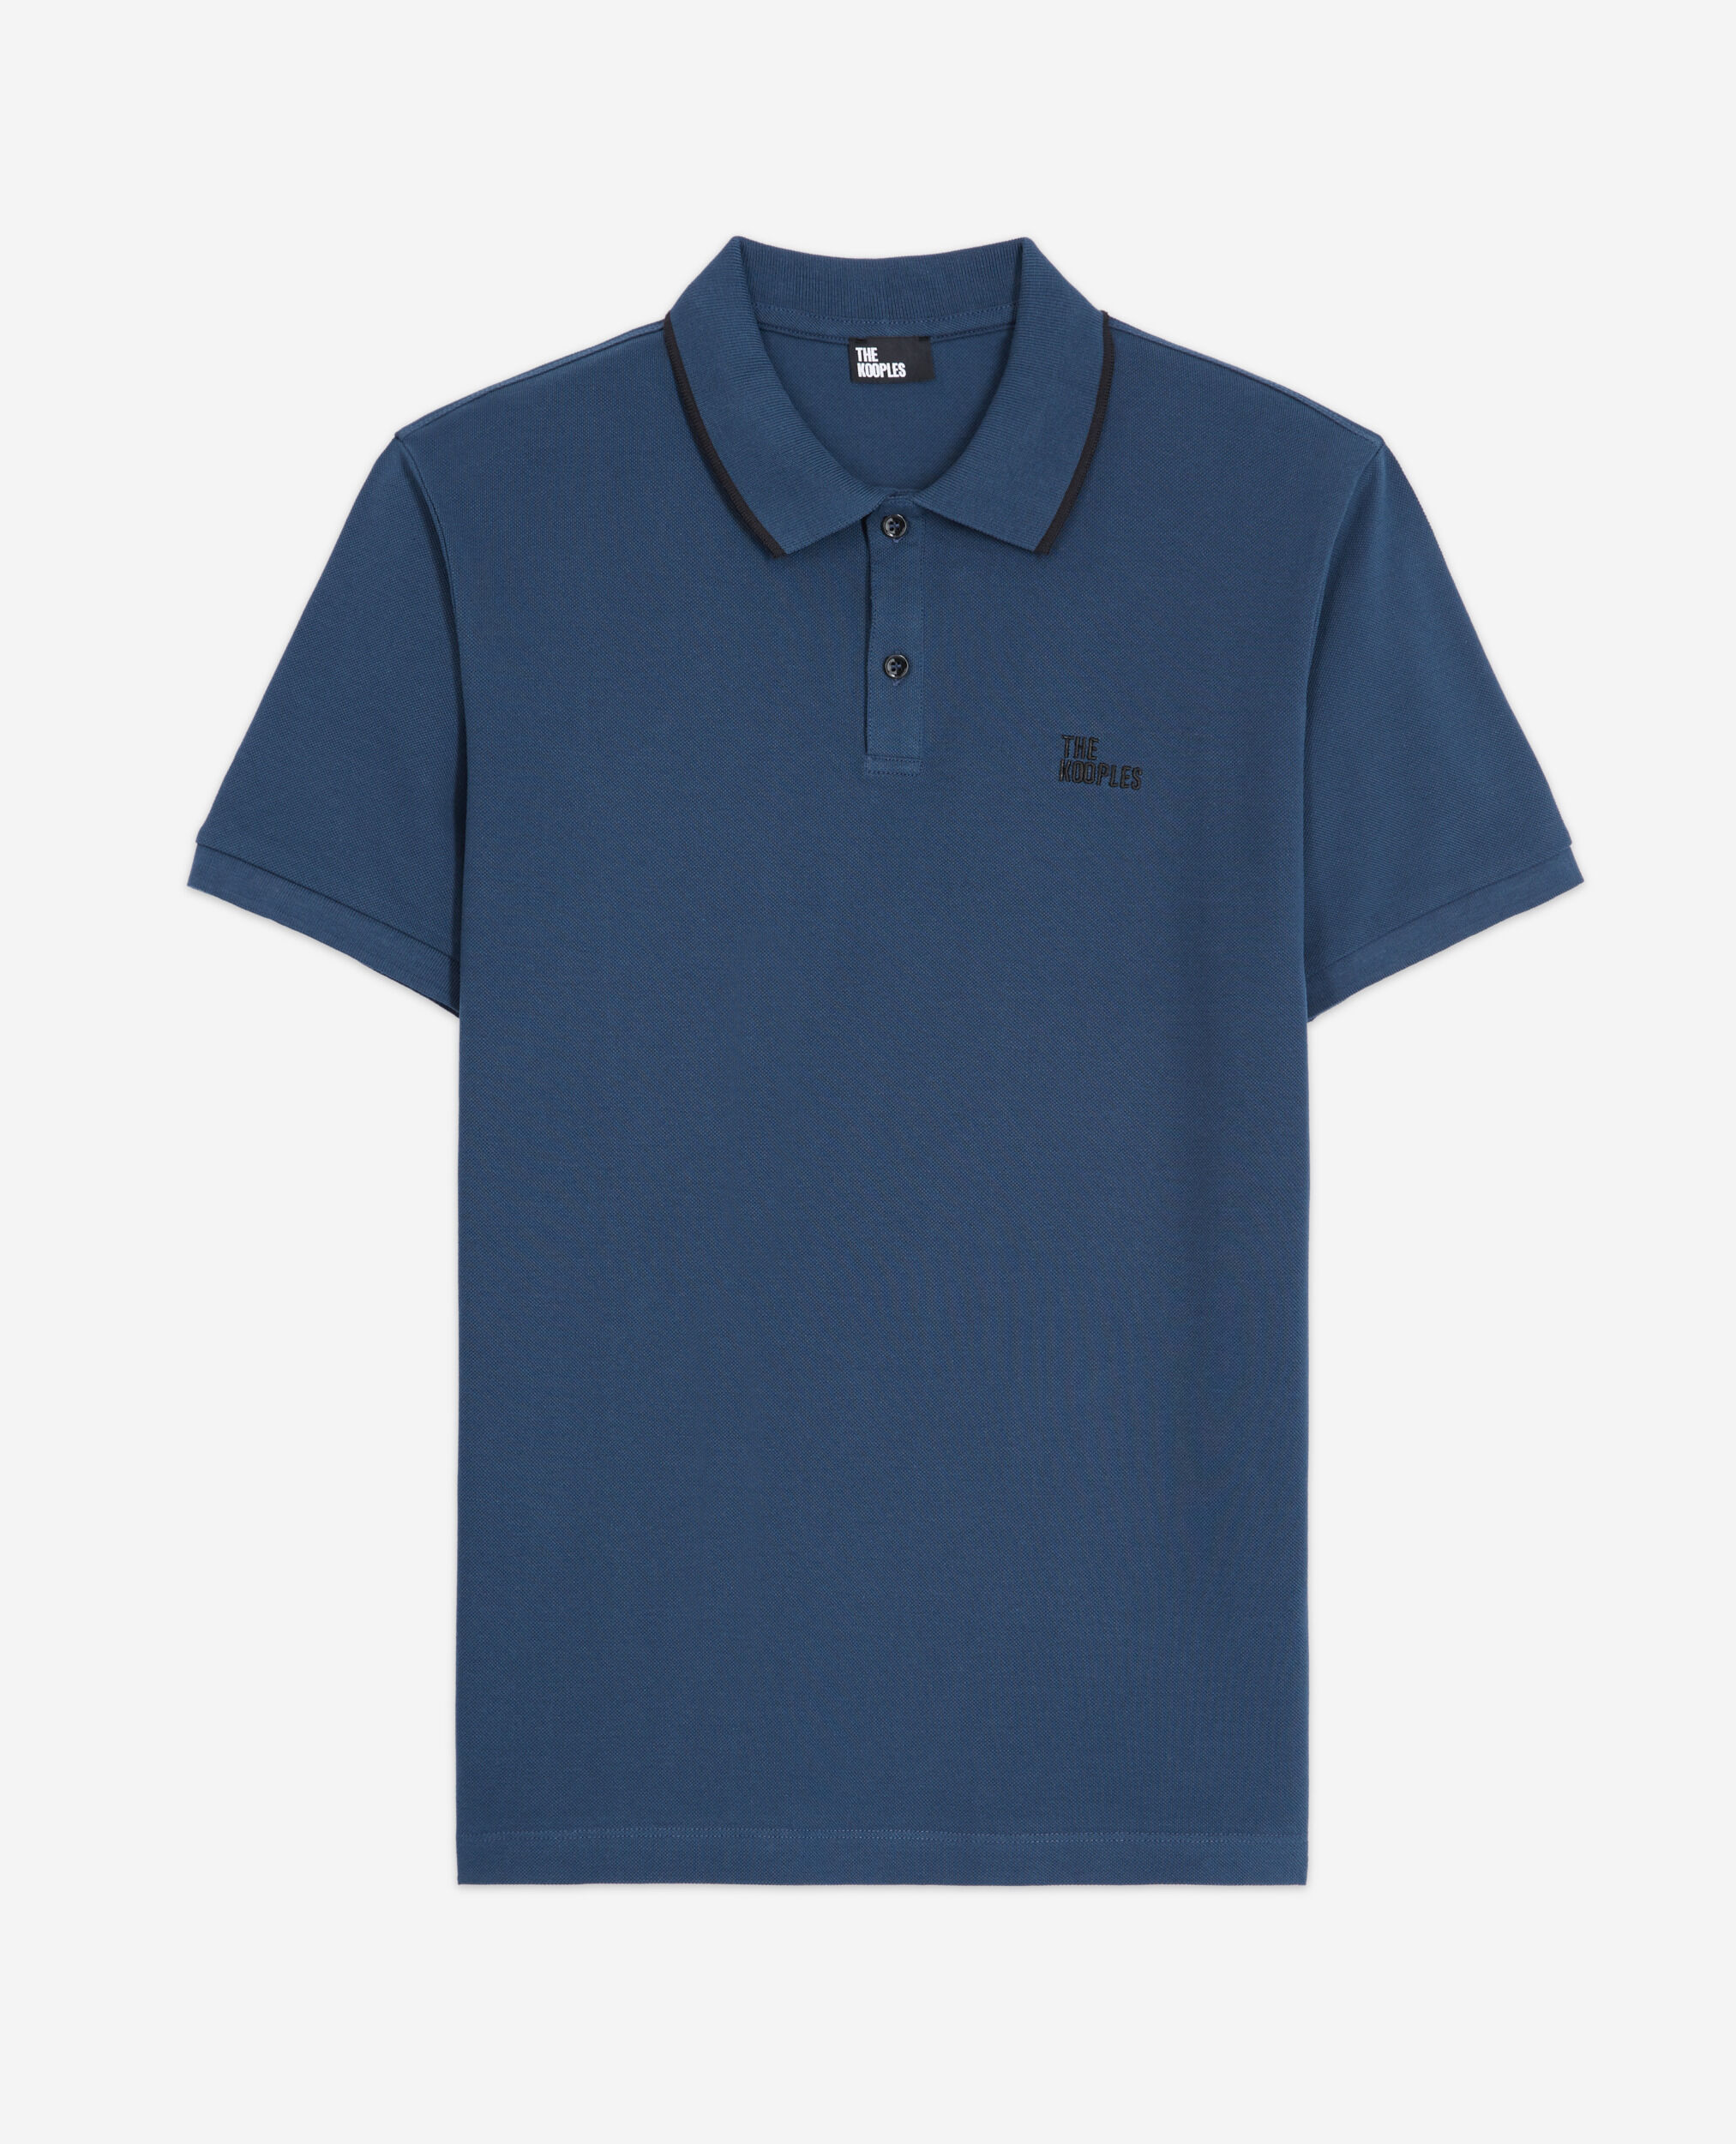 Polo classique bleu marine, NAVY, hi-res image number null